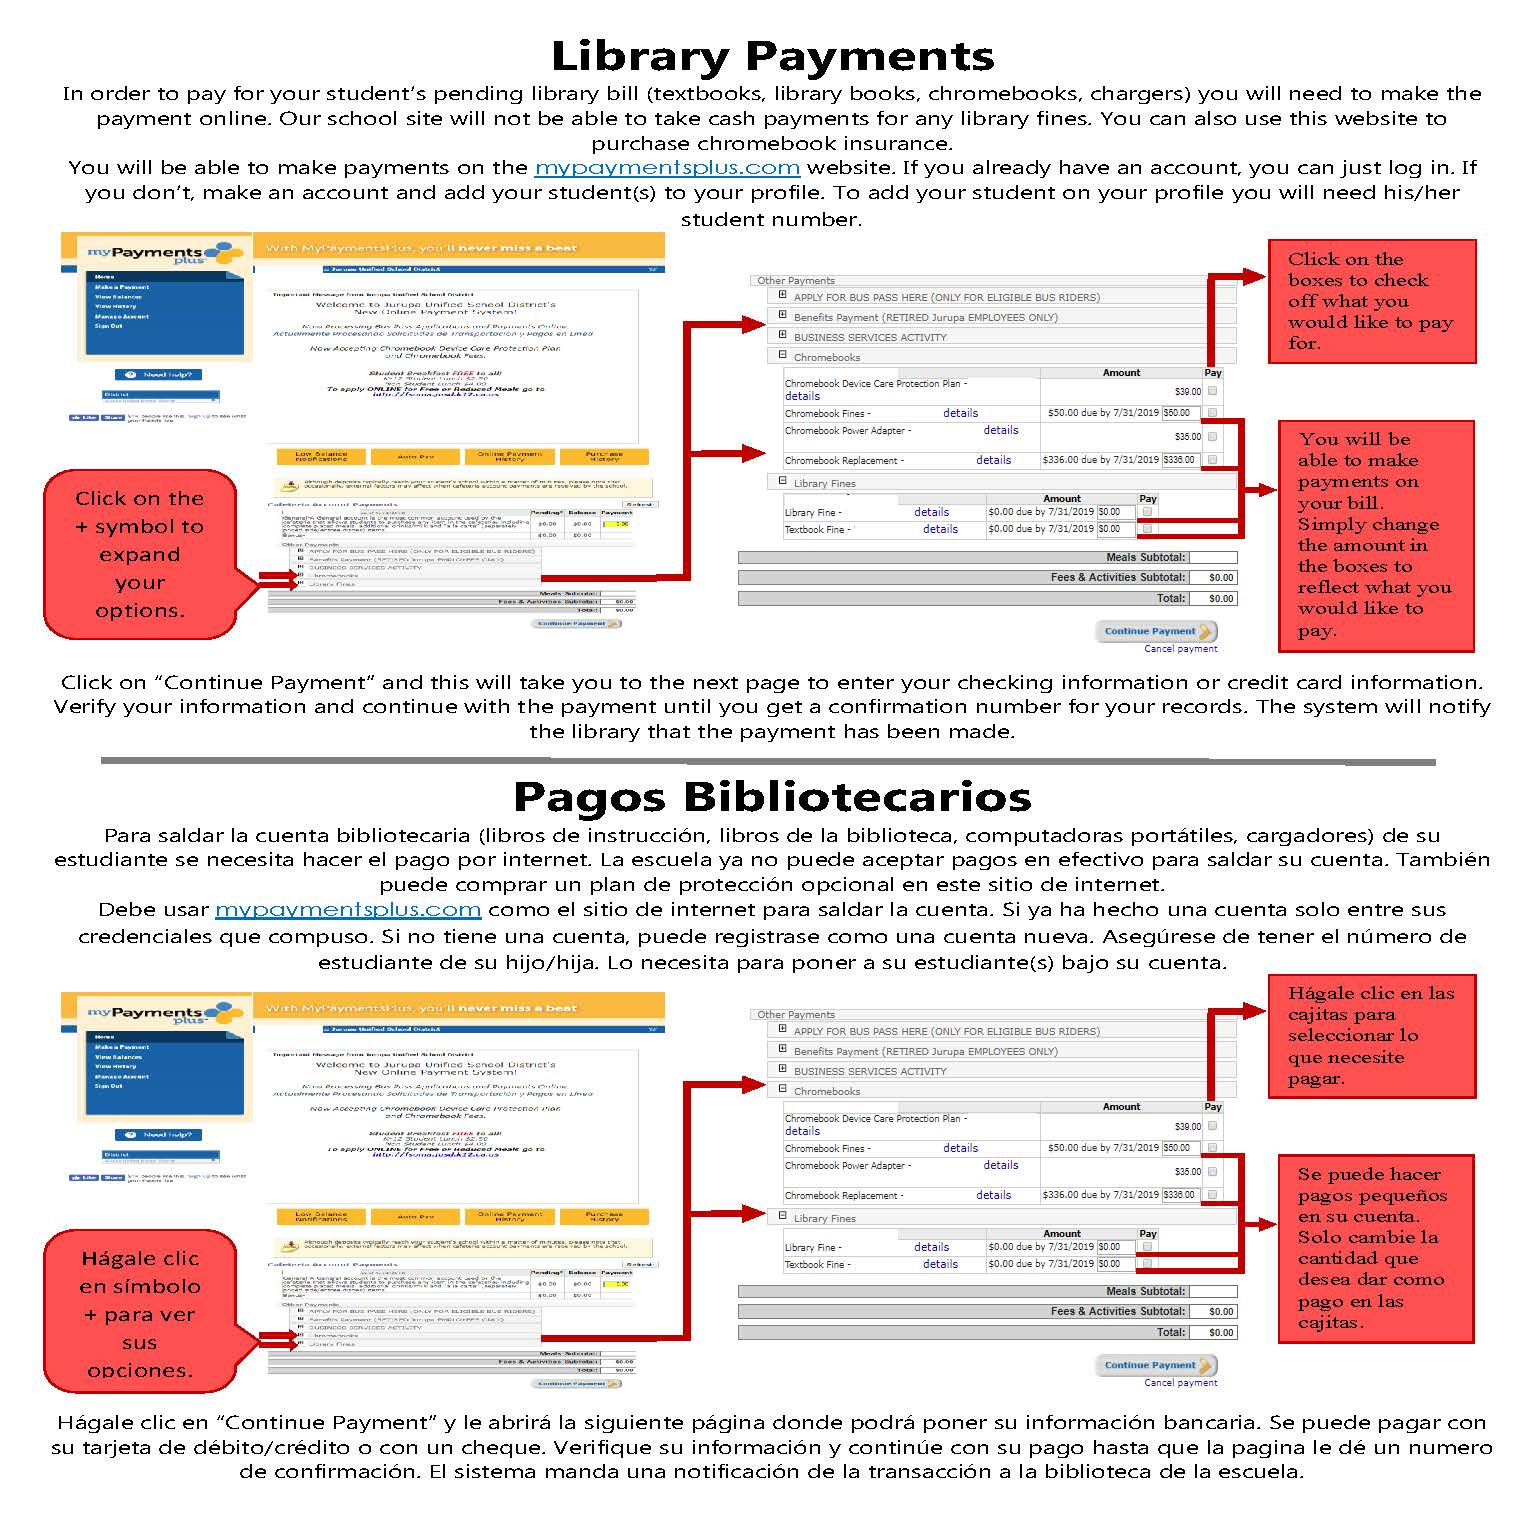 my payment plus-Library Payments (002).jpg